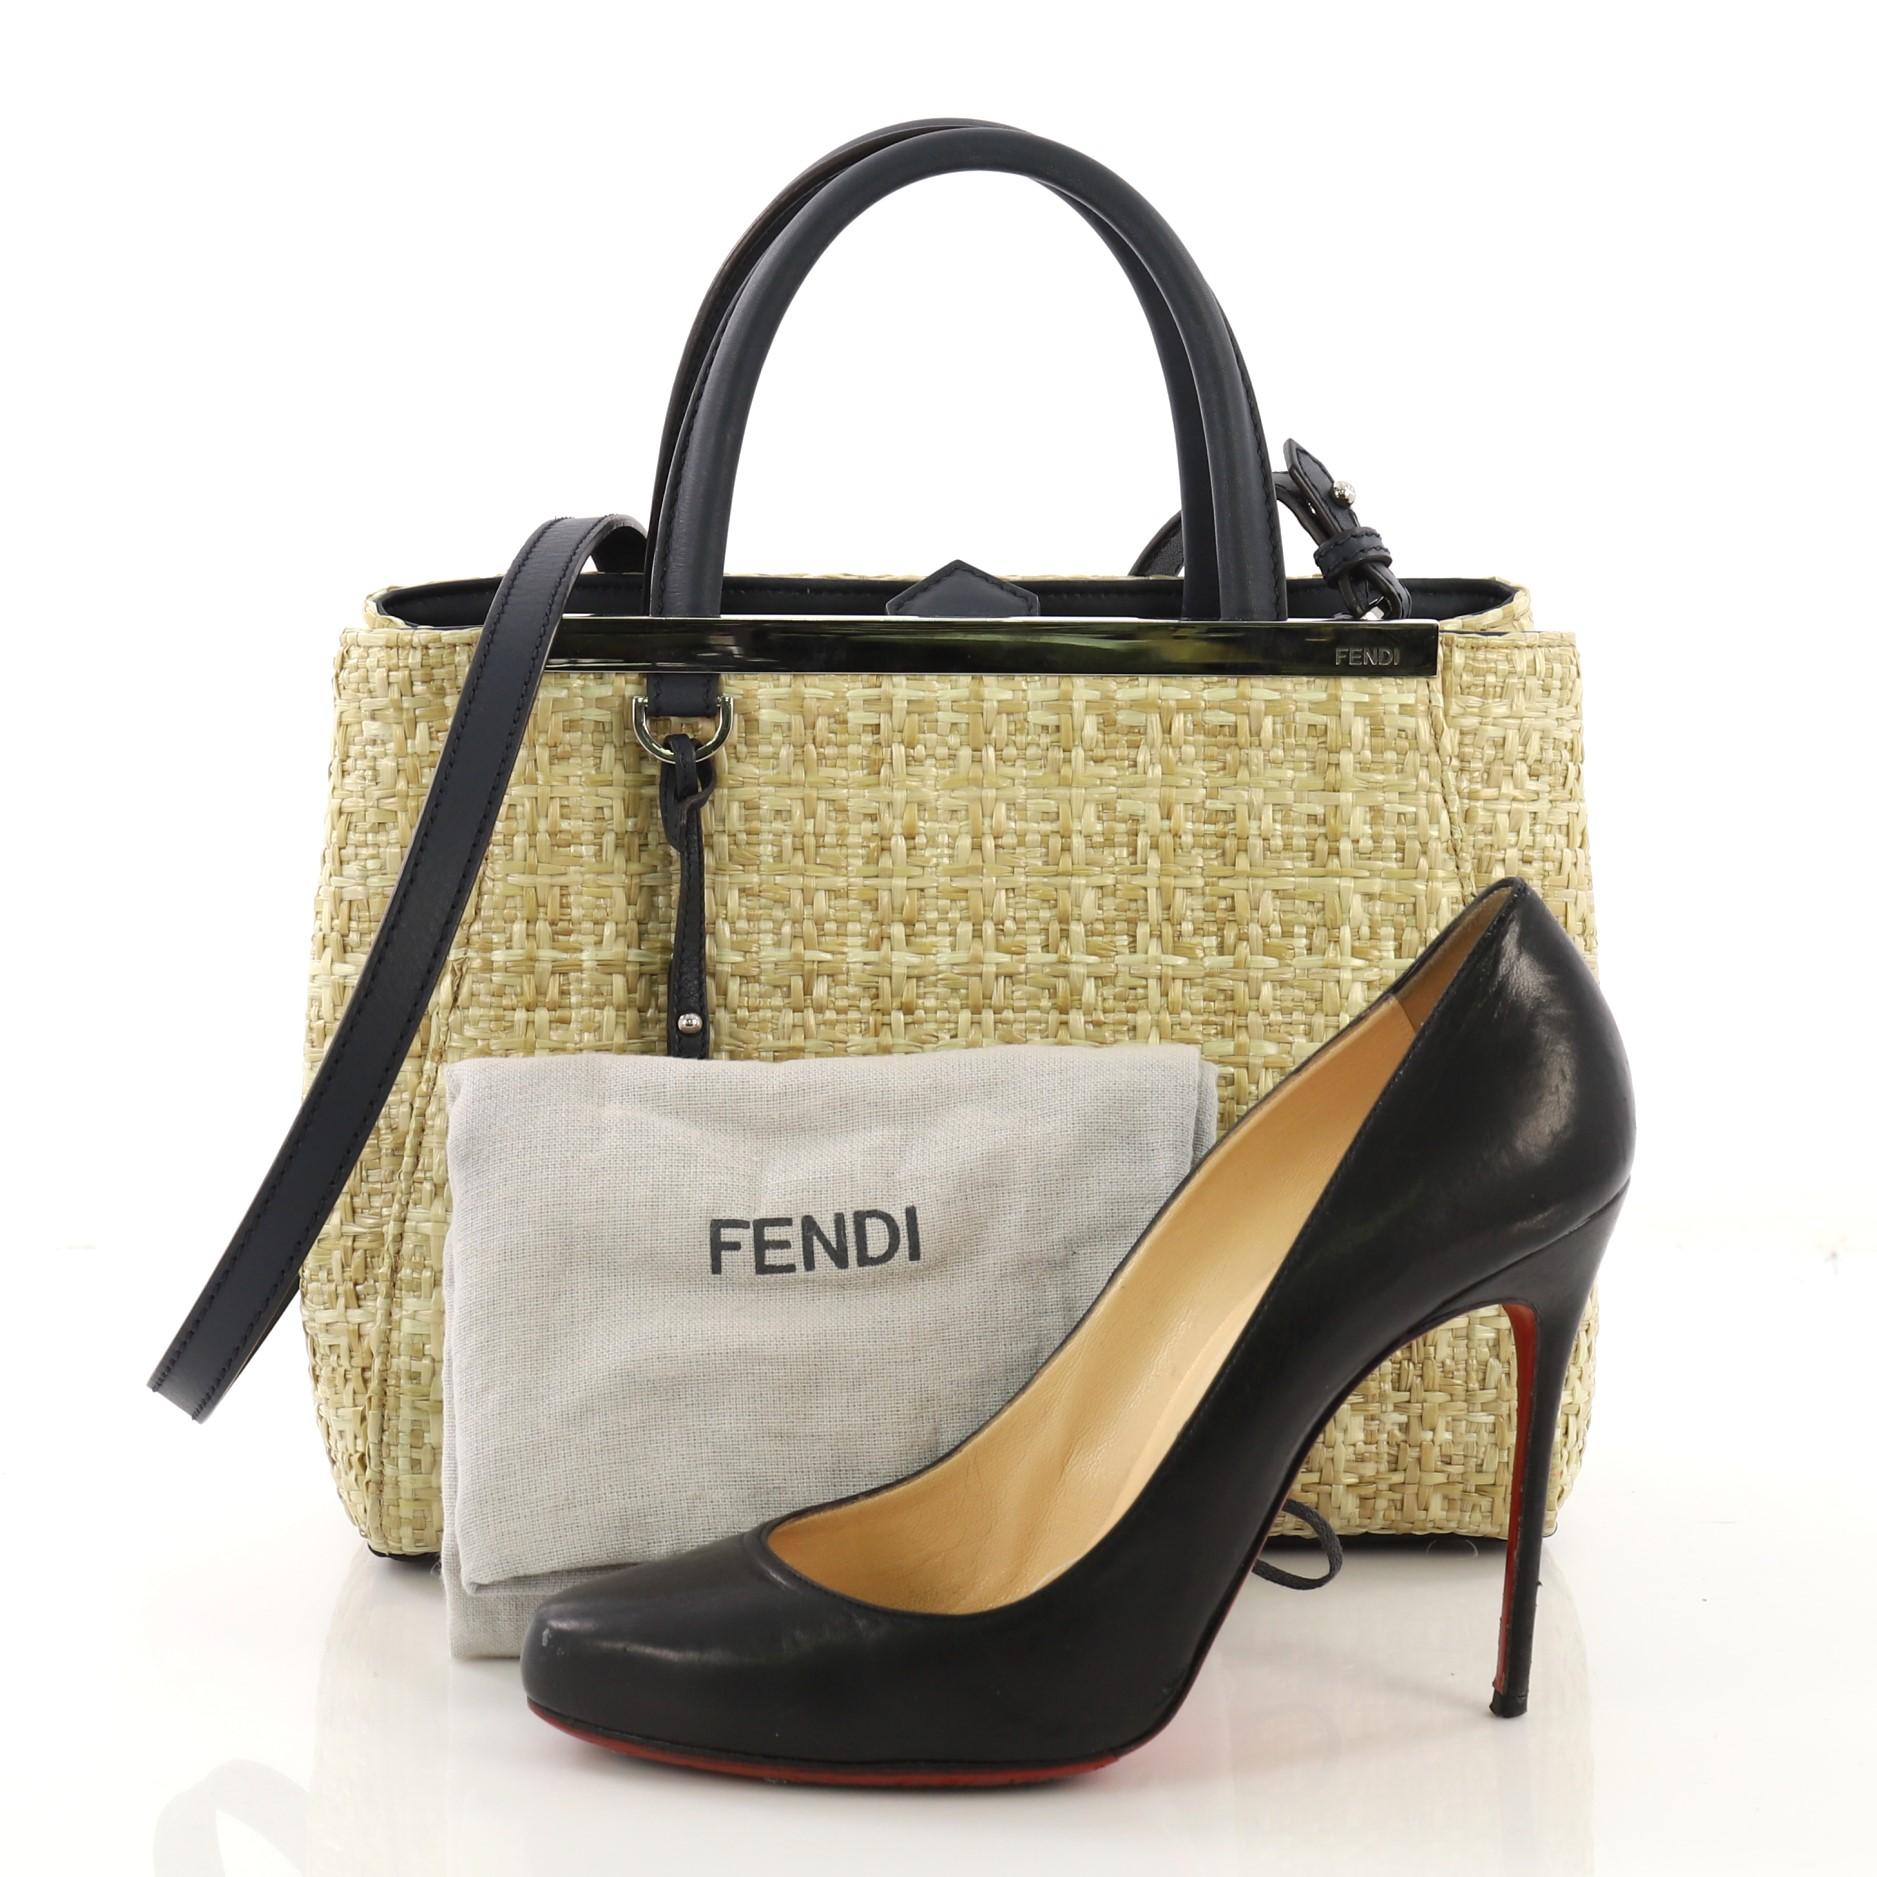 This Fendi 2Jours Handbag Straw Petite, crafted from beige straw, features dual rolled leather handles, top bar with Fendi brand name, and silver-tone hardware. Its snap tab closure opens to a navy fabric interior with a middle zip compartment.